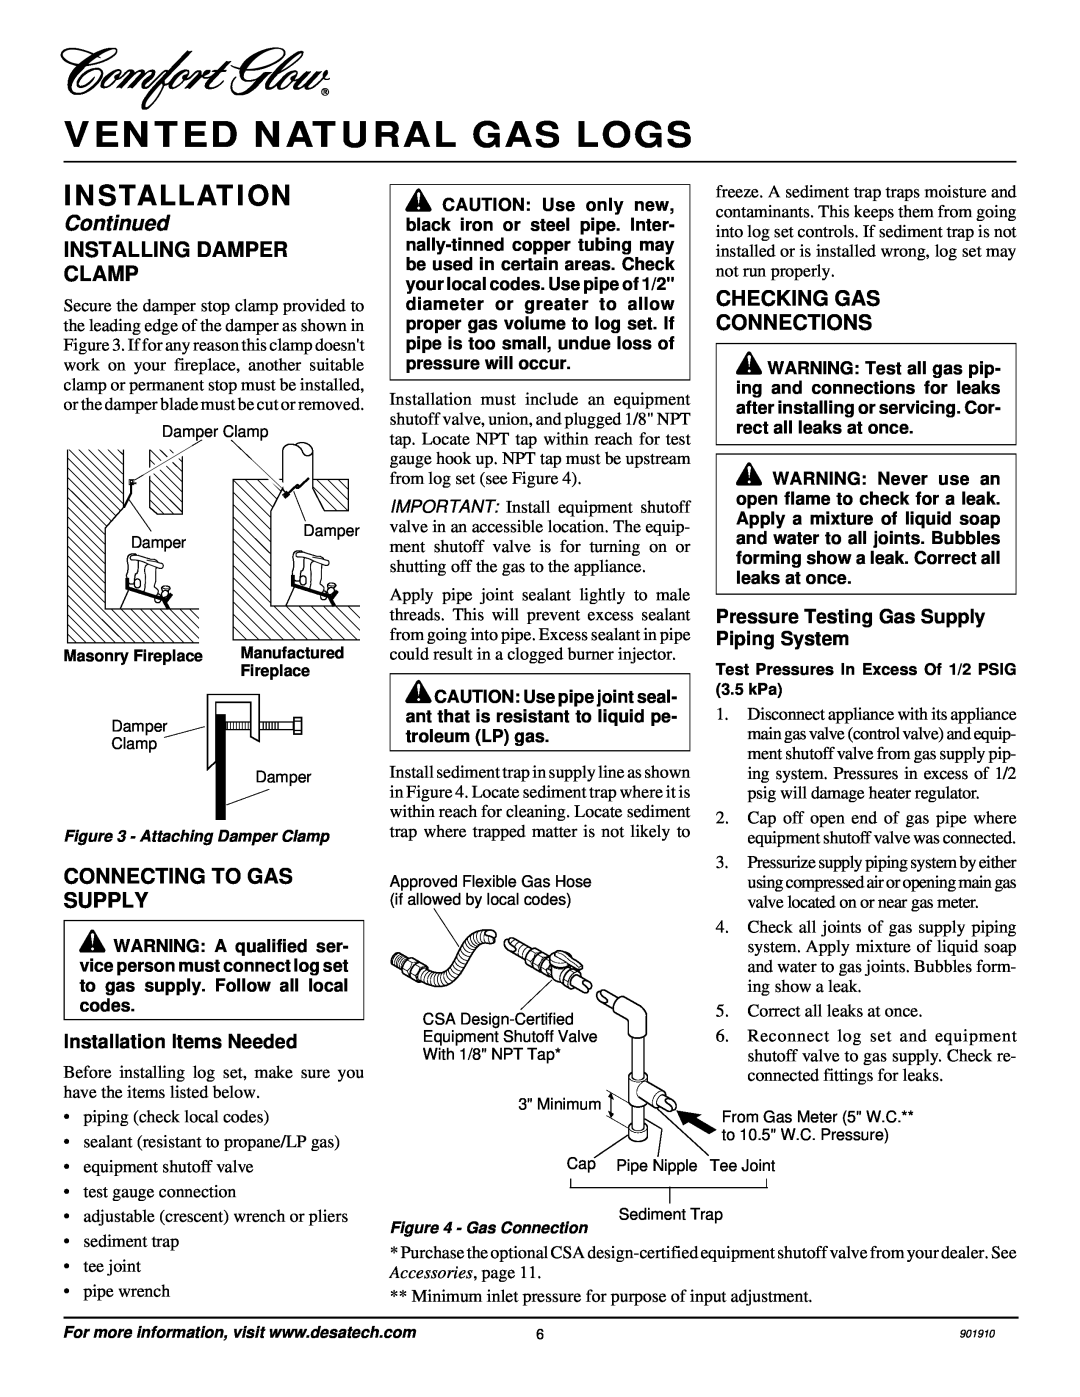 Desa 901910-01A.pdf Vented Natural Gas Logs, Installation, Continued, Installing Damper Clamp, Connecting To Gas Supply 